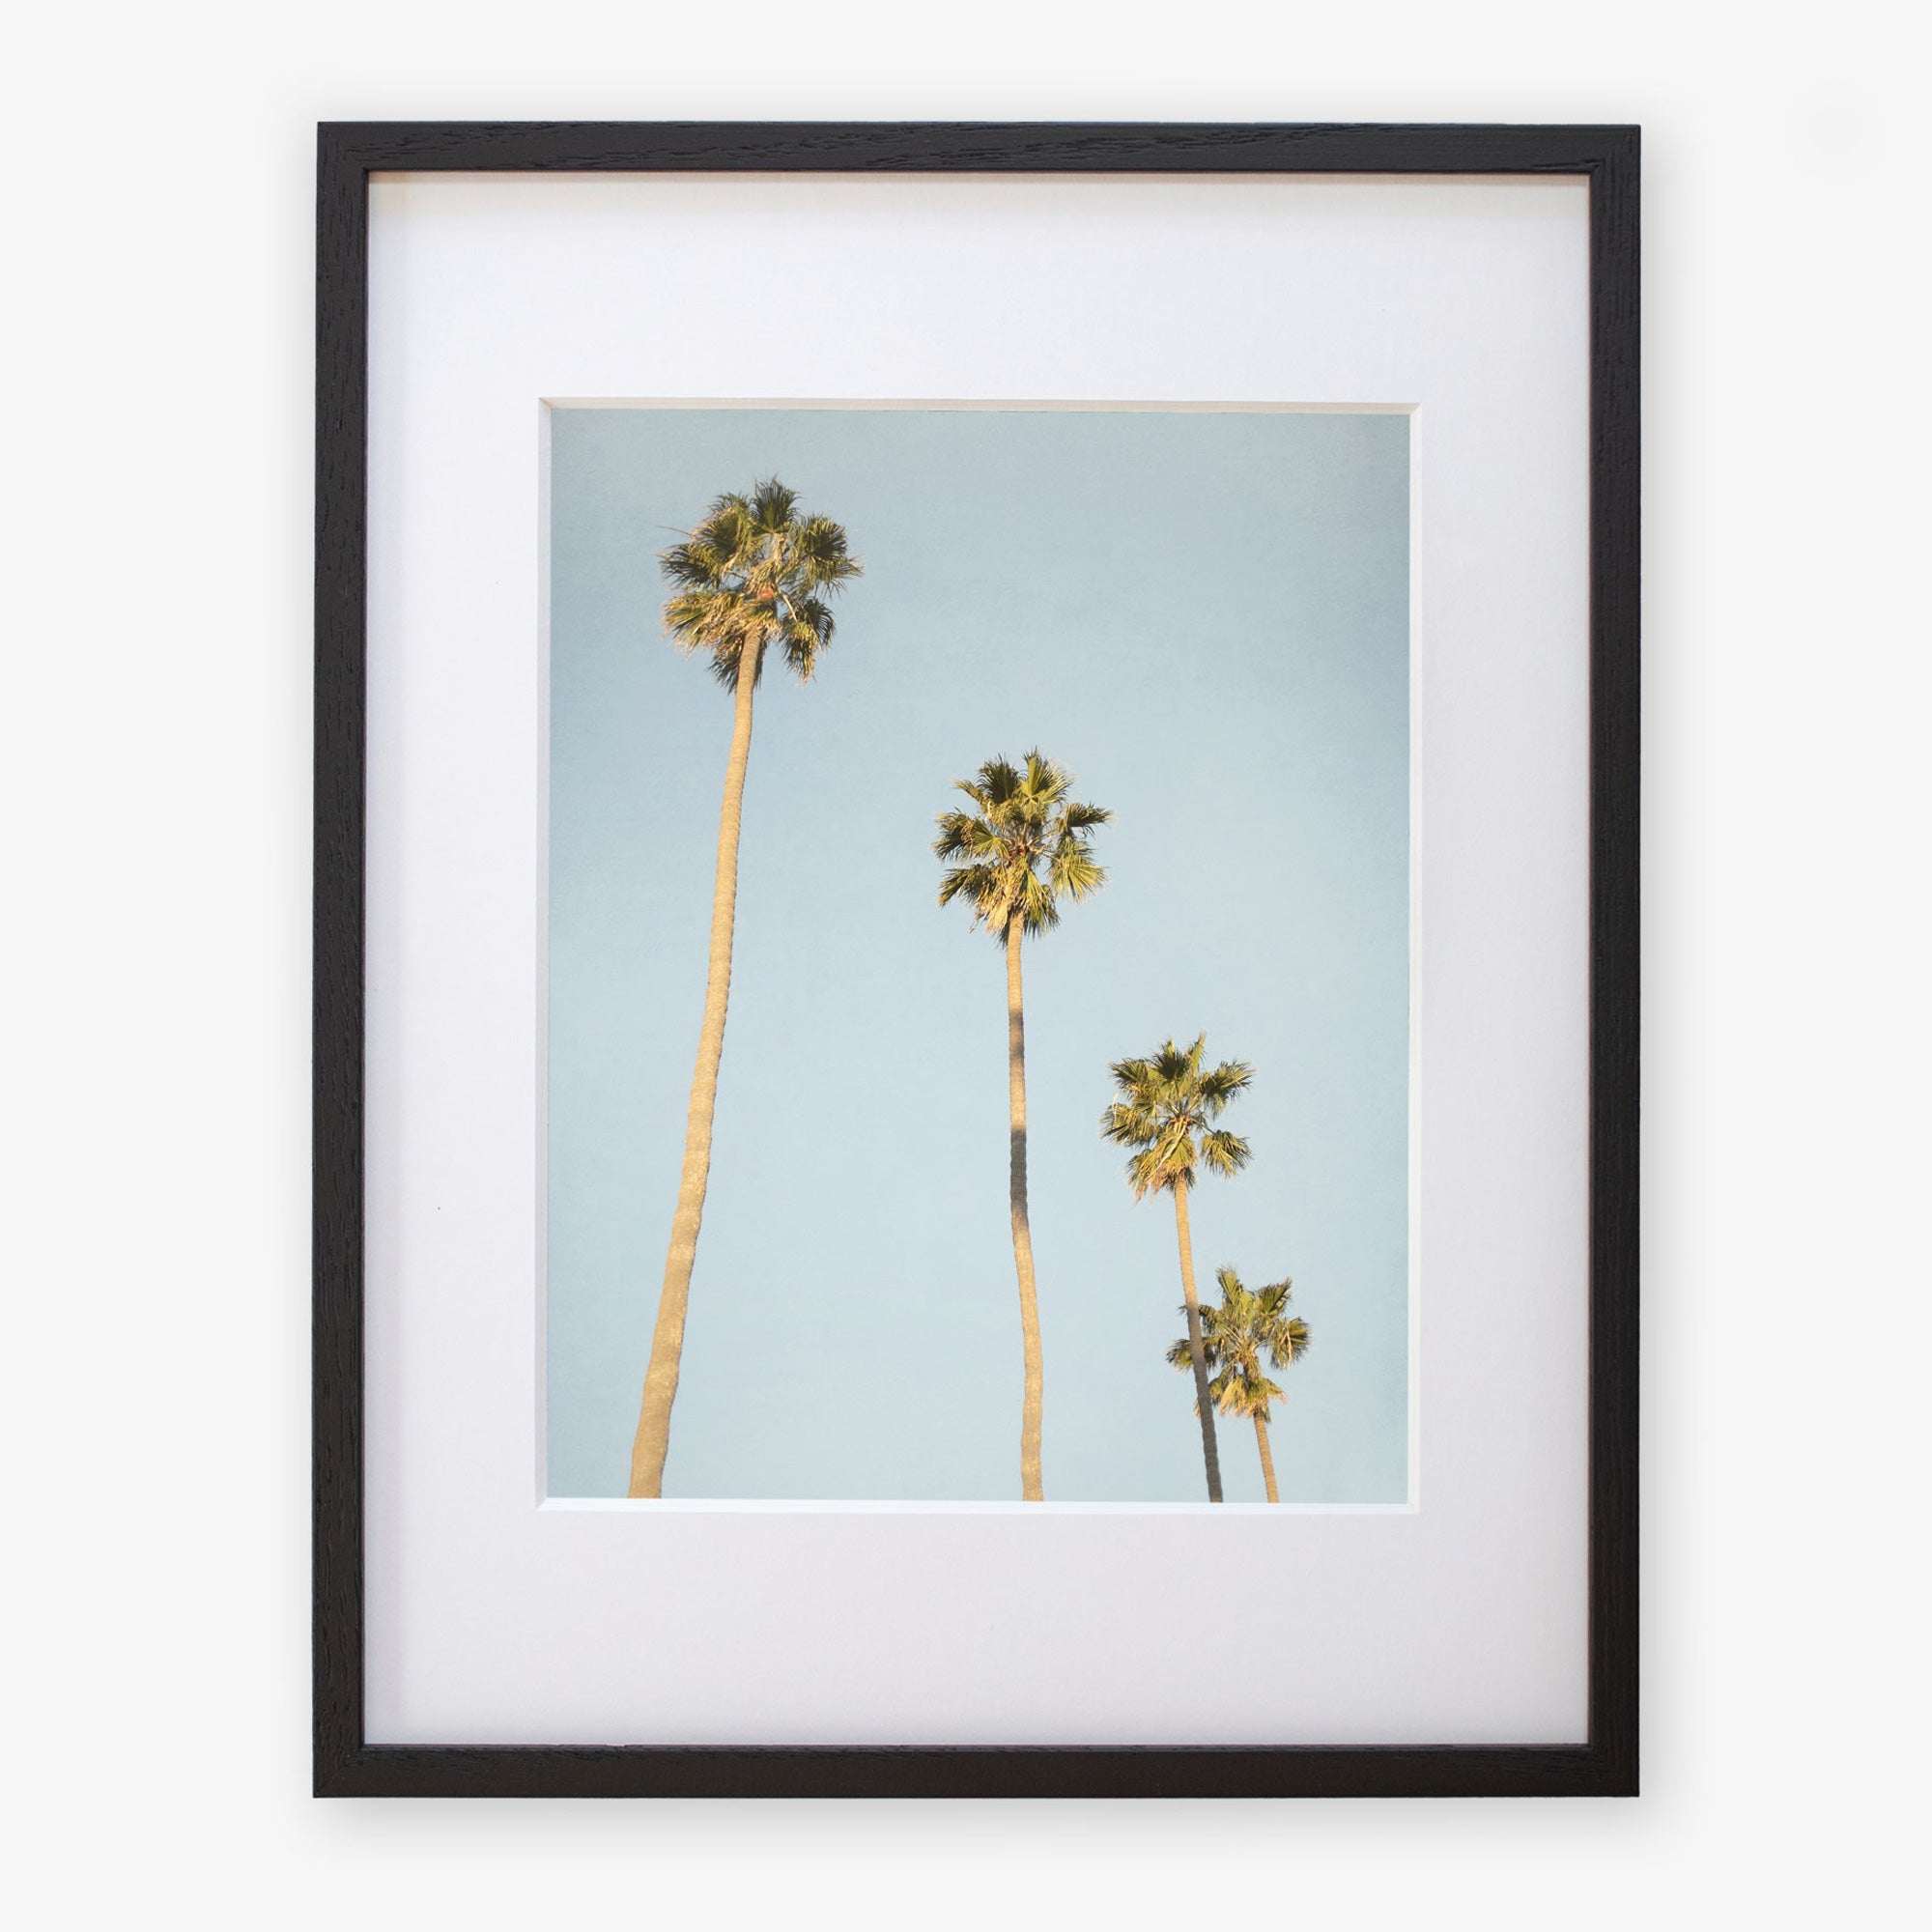 A framed Los Angeles Palm Tree Photographic Print &#39;Palm Stairs to Heaven&#39; depicting four tall palm trees against a clear California sky, with the tallest tree slightly leaning to the right by Offley Green.